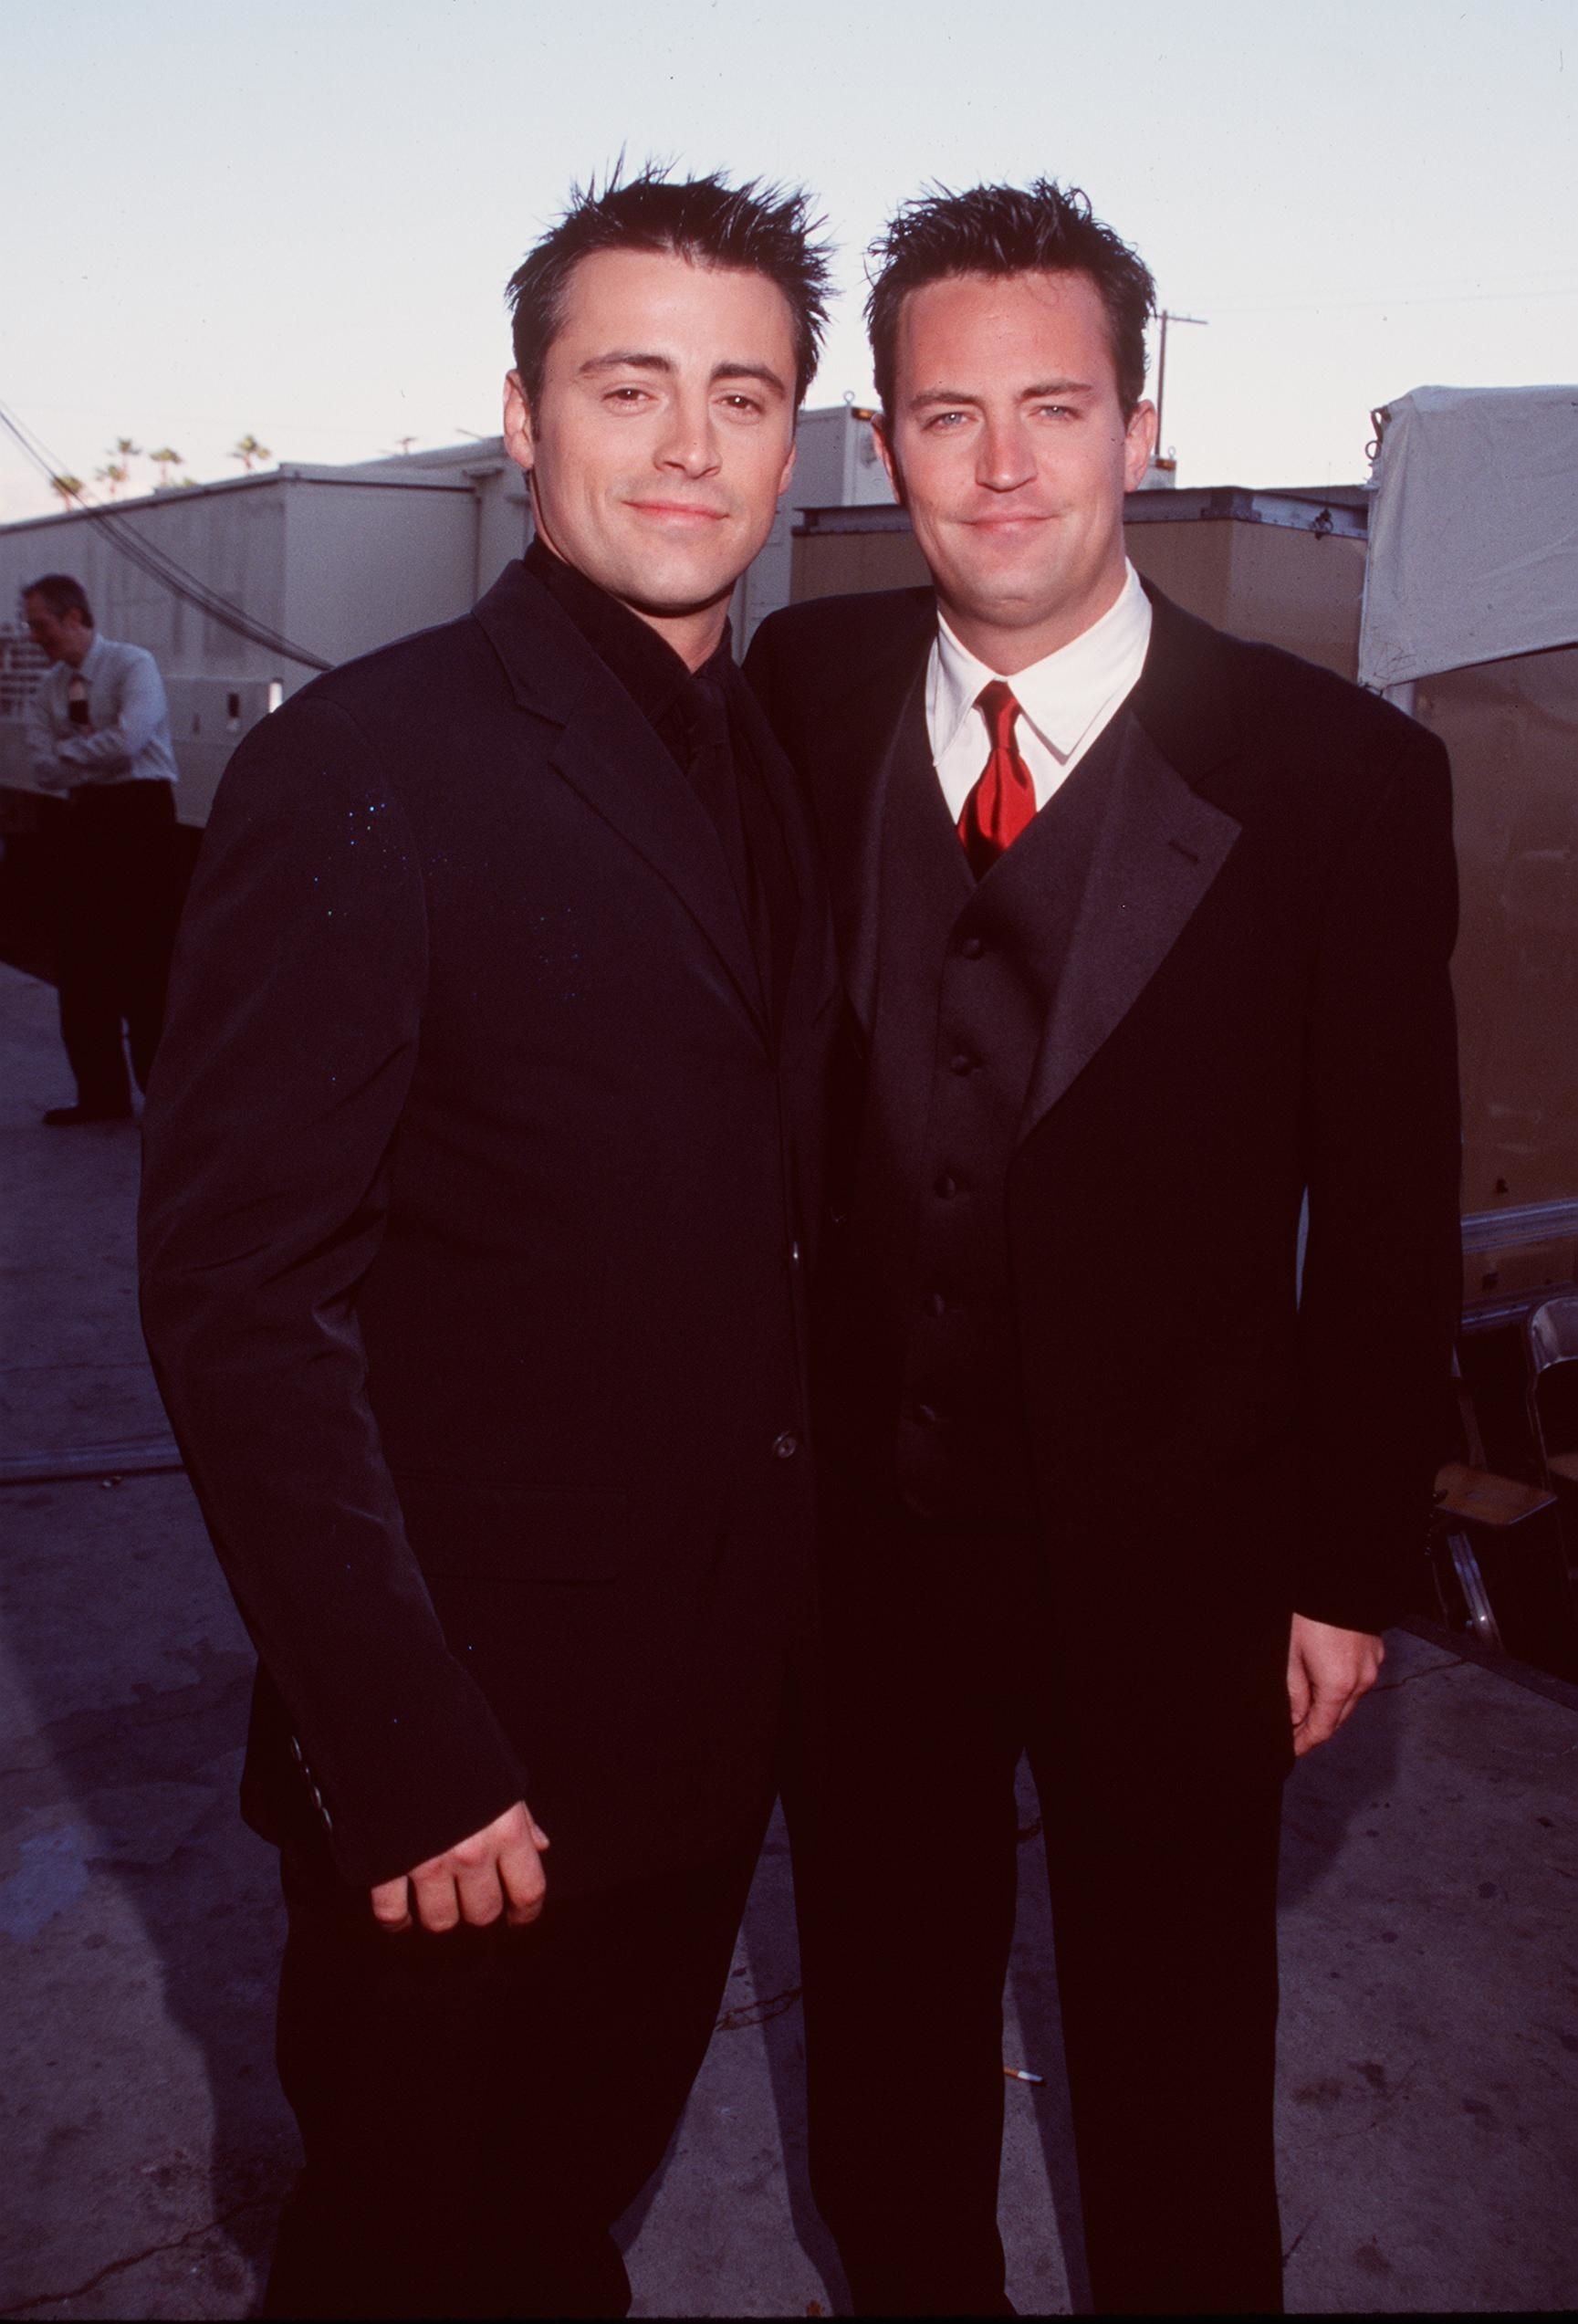 the two in suits at an event